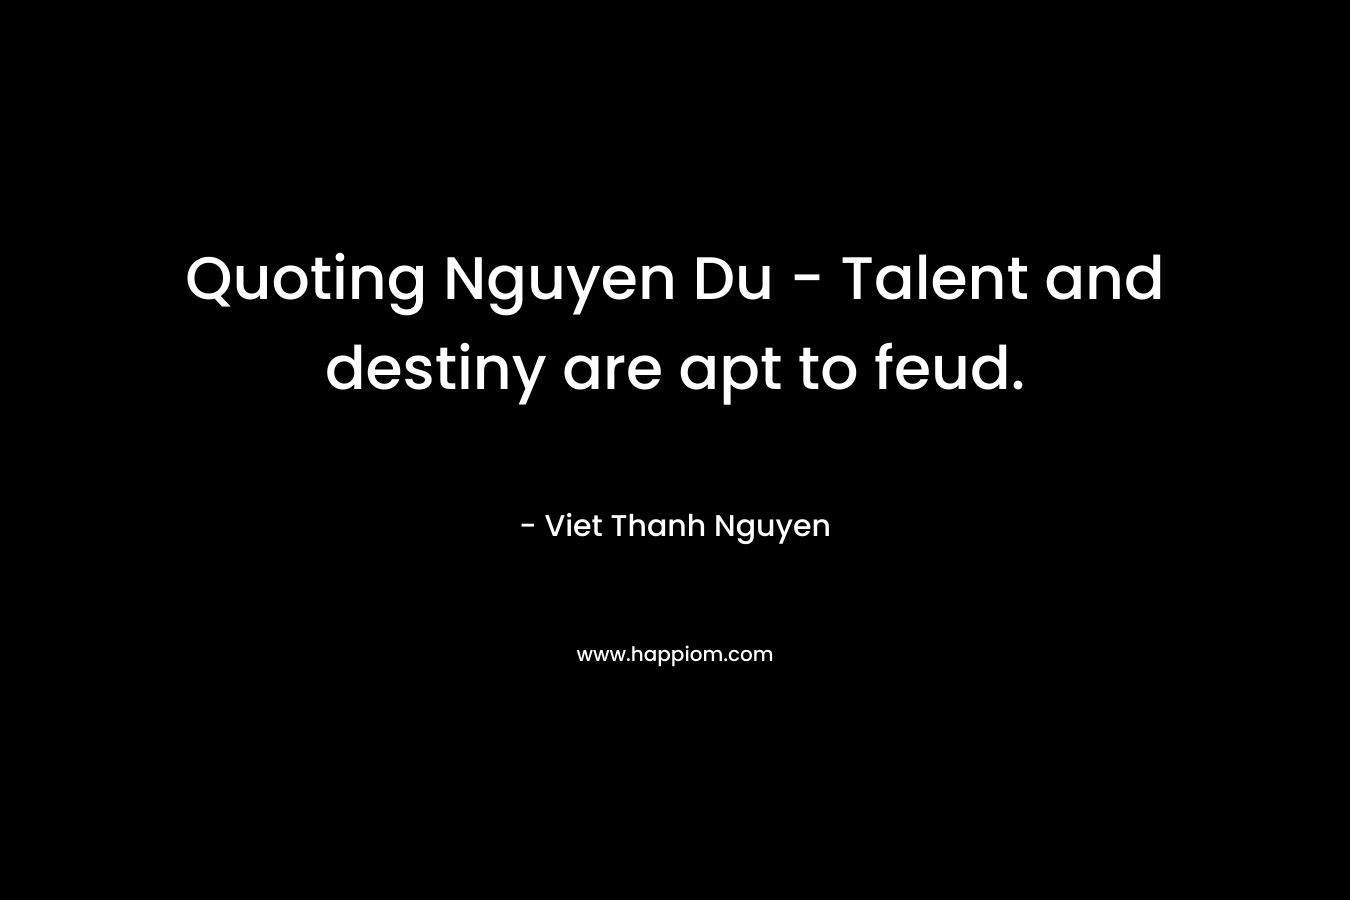 Quoting Nguyen Du - Talent and destiny are apt to feud.